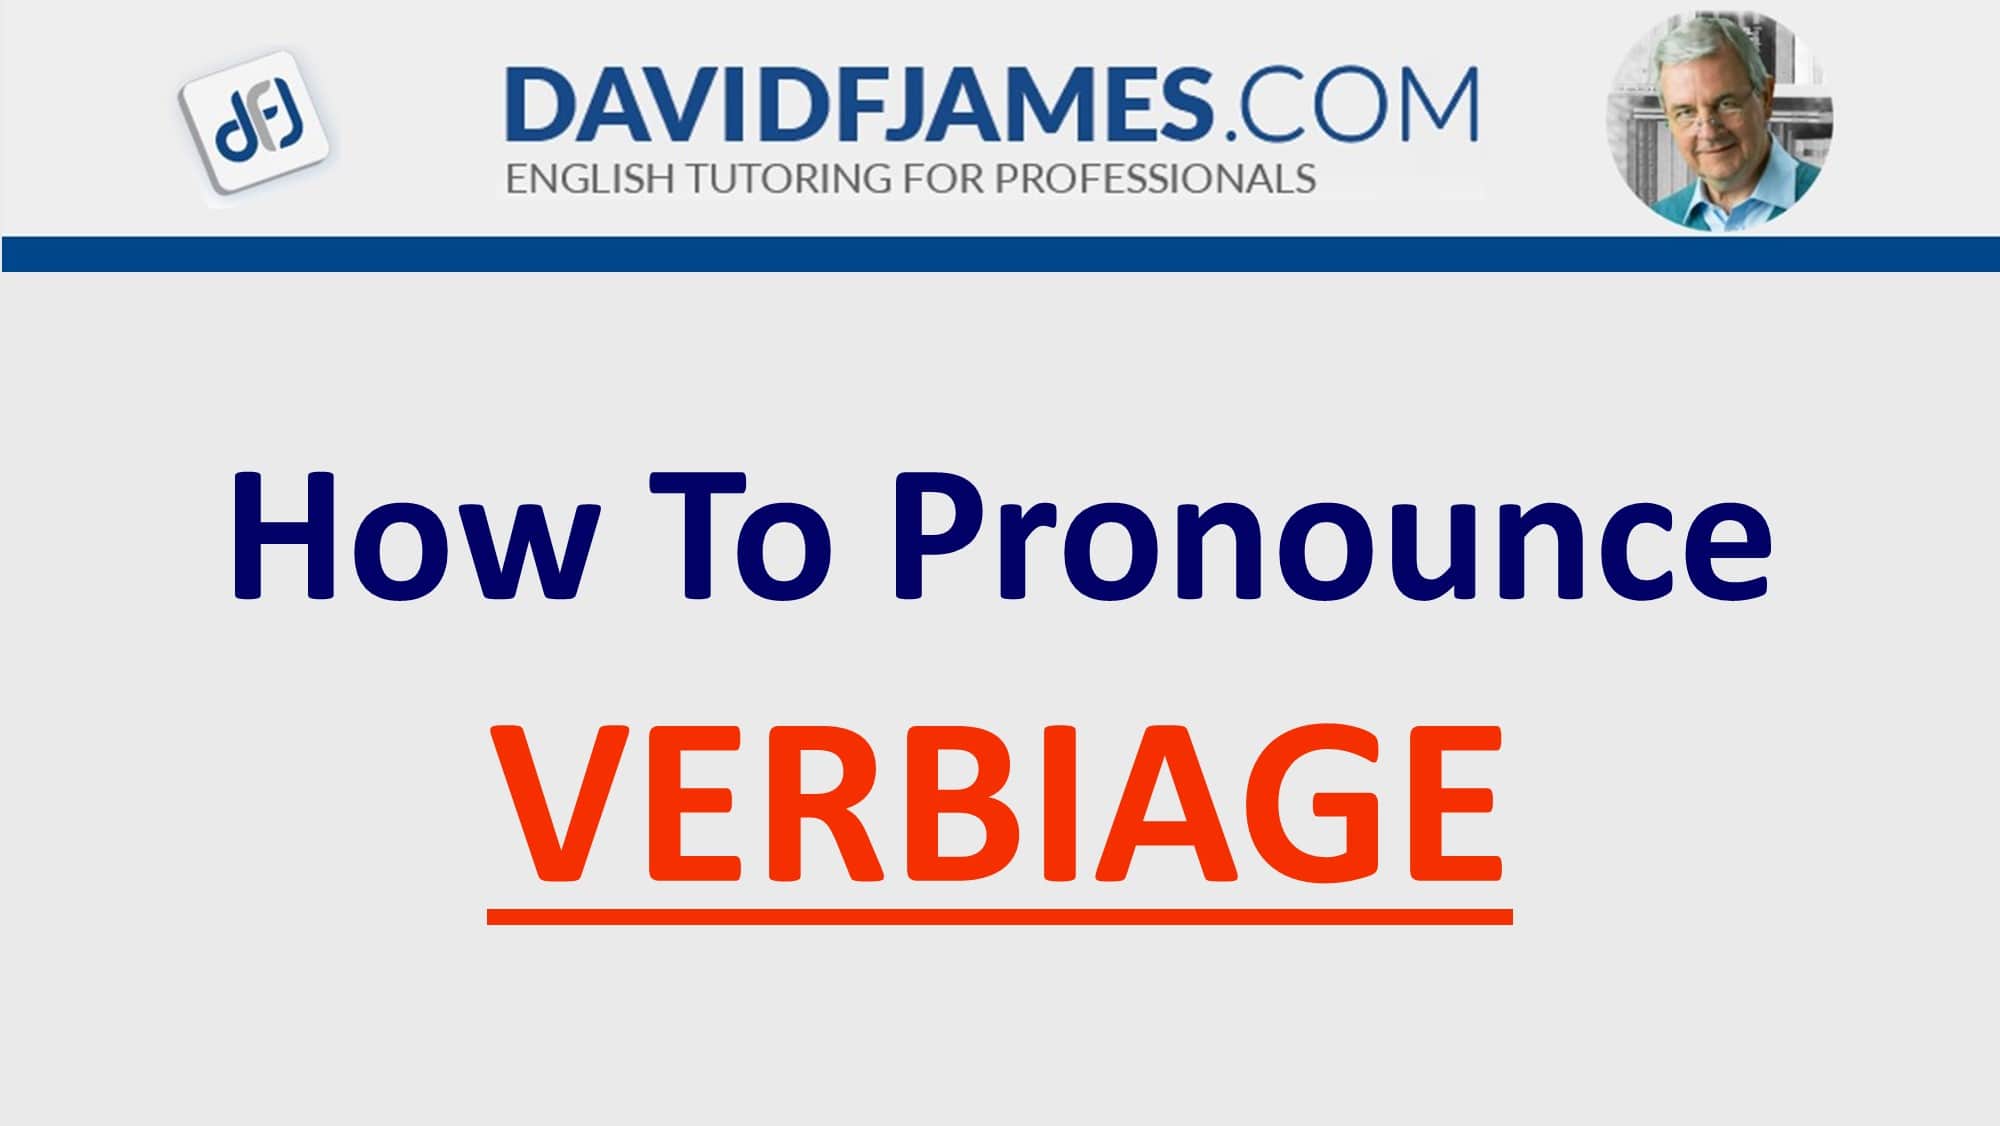 how to pronounce verbiage - verbiage in a sentence